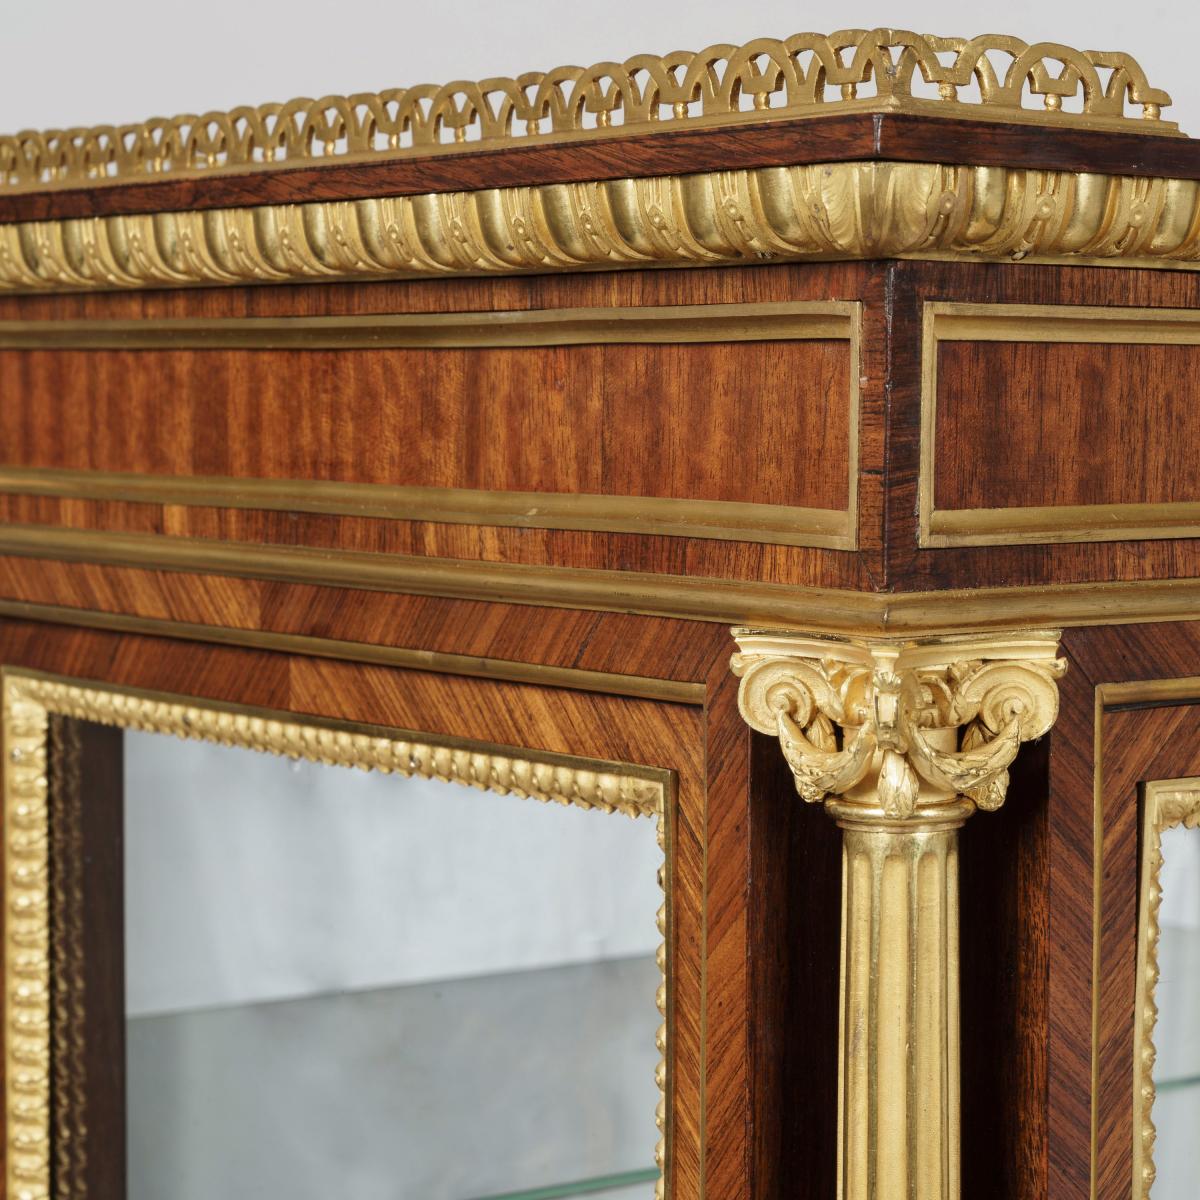 A Pair of Display Cabinets in the Louis XVI Manner